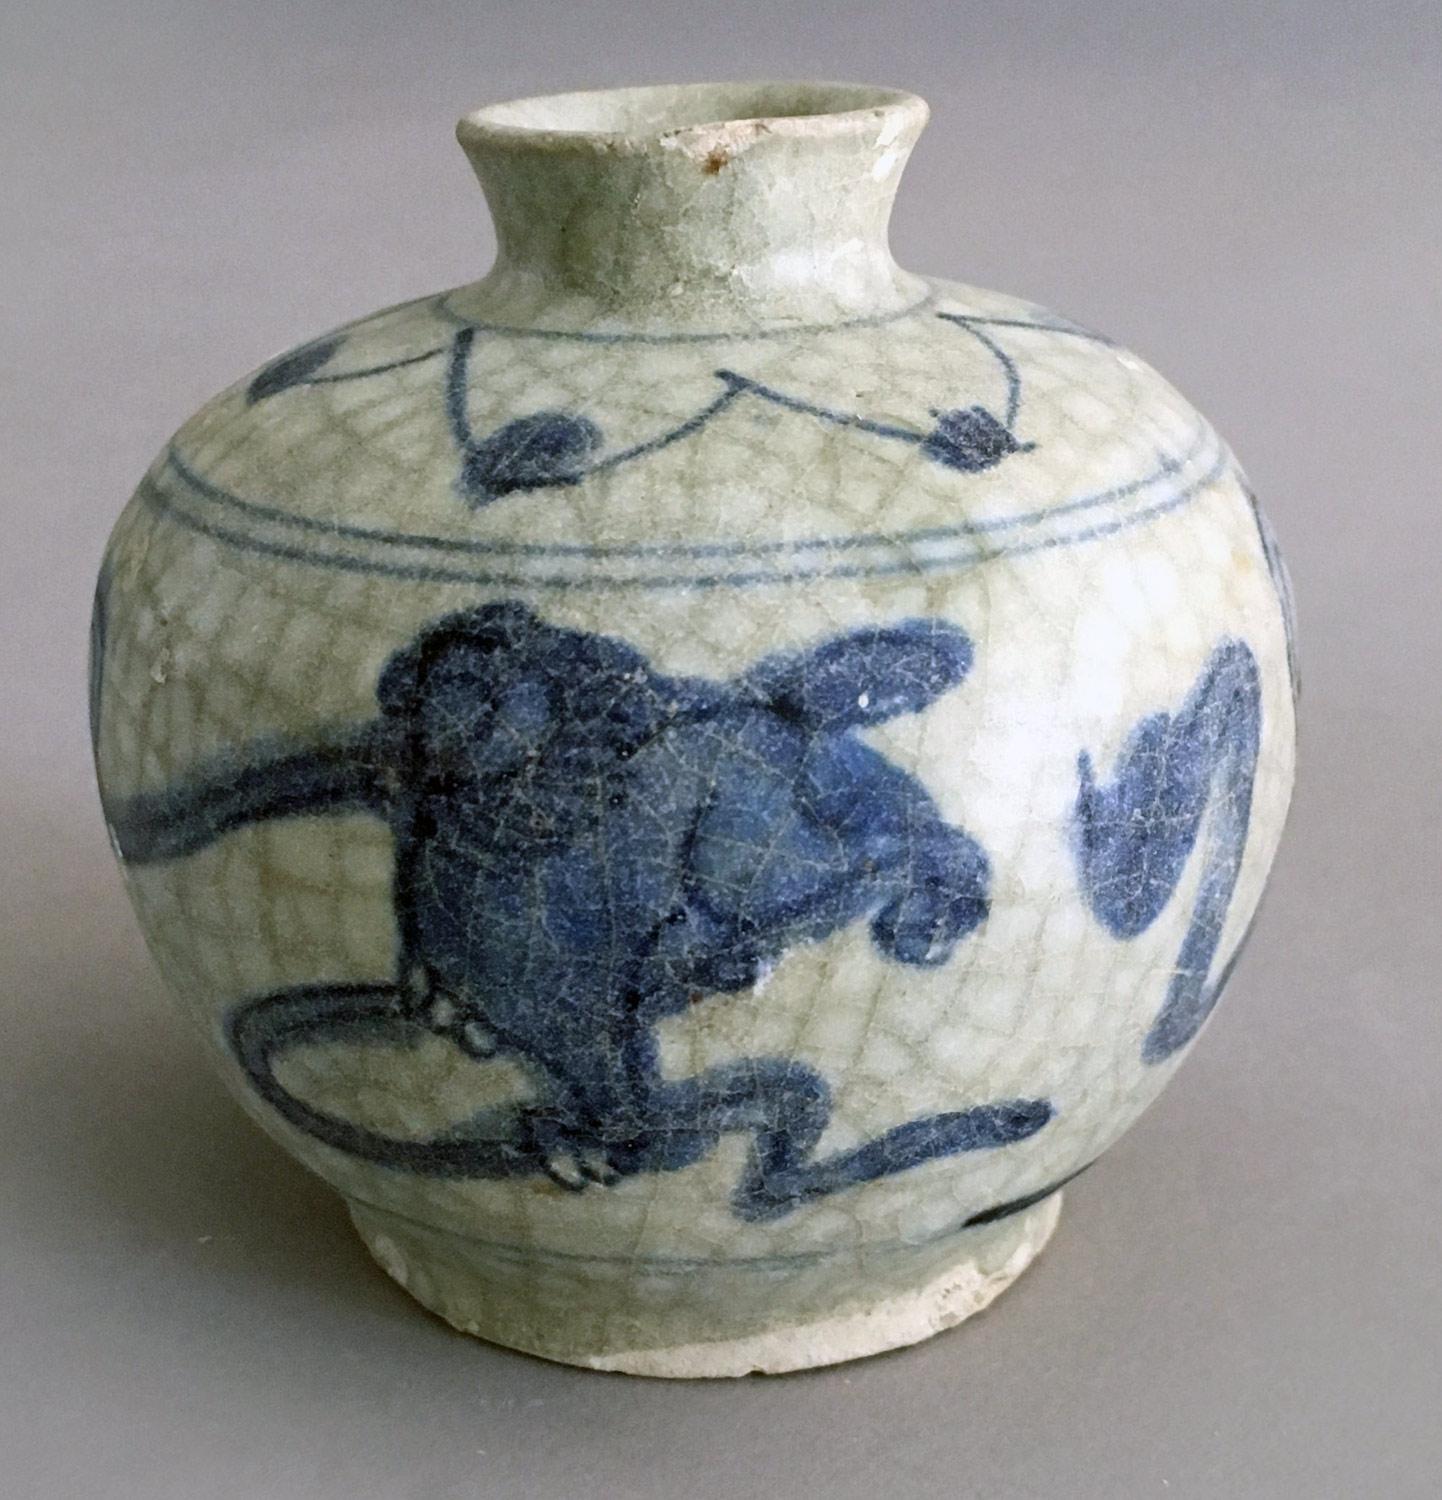 Set of four small porcelain blue and white jars from the Wanli Shipwreck of 1625. Two of the jars are decorated with dragons and snakes. The other two have floral designs.

As the story goes, around the year 1625, the Portuguese had acquired a